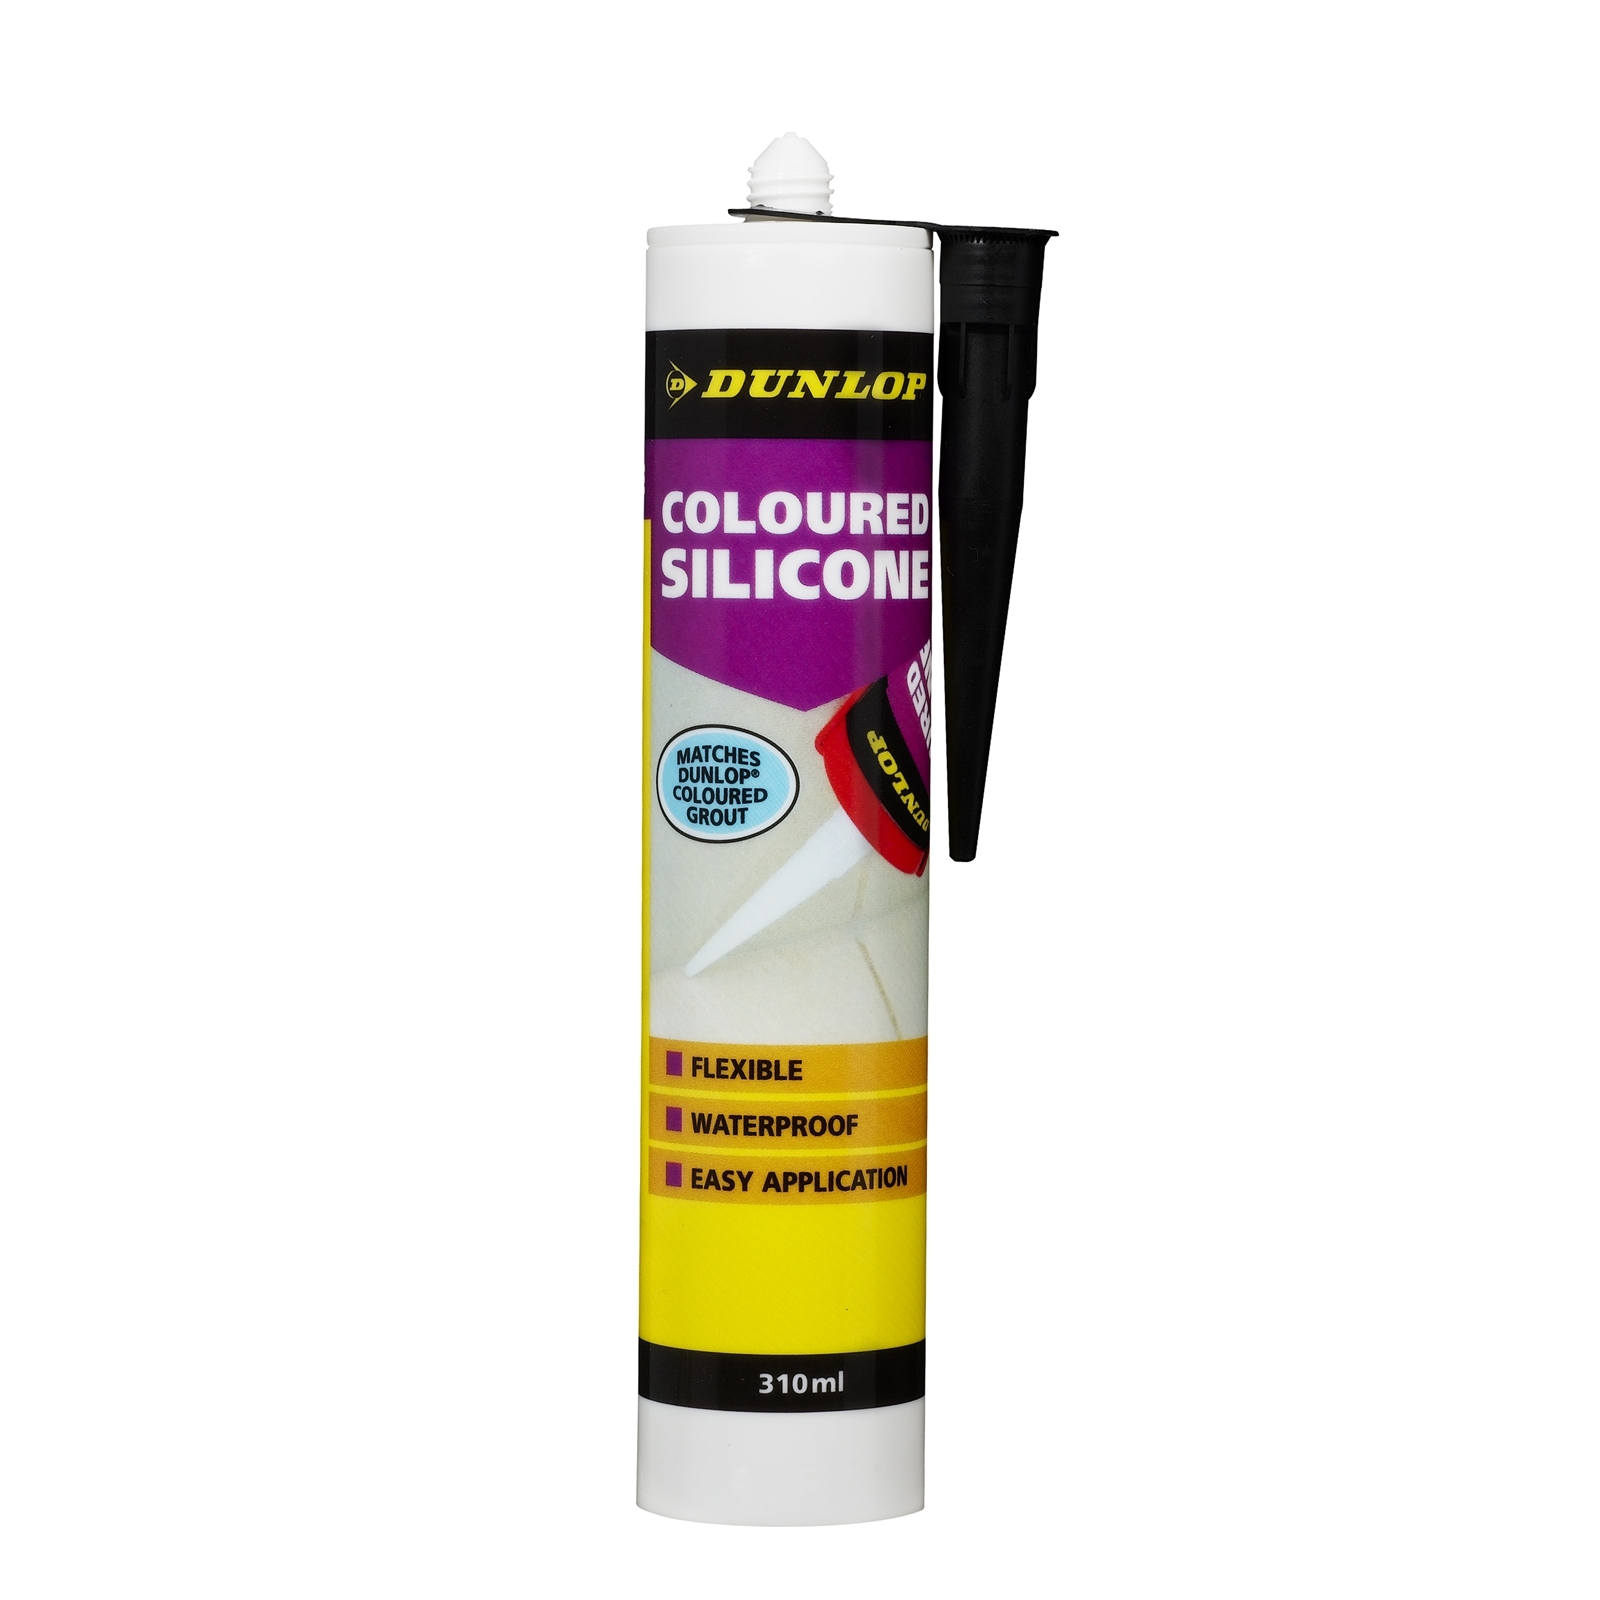 Dunlop 310ml Coloured Silicone - Charred Ash